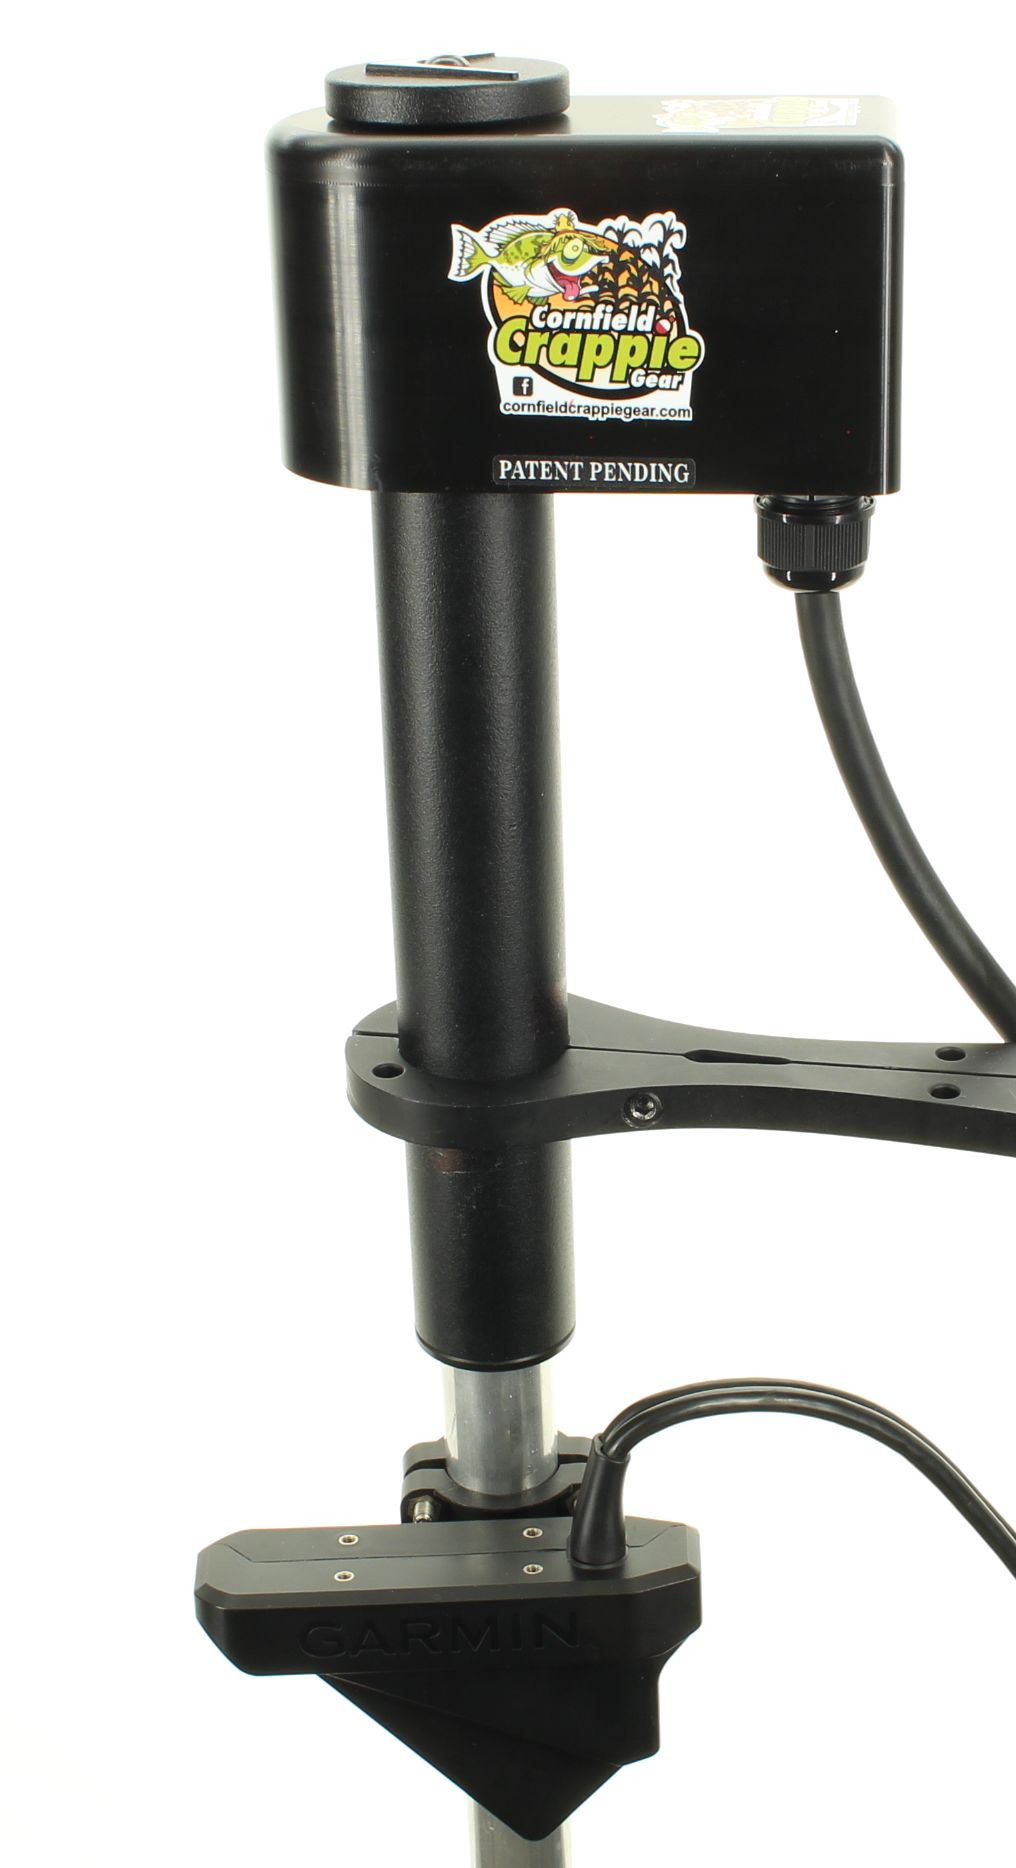 THE VERY BEST MOUNT FOR ACTIVE TARGET OR LIVESCOPE! Fishing